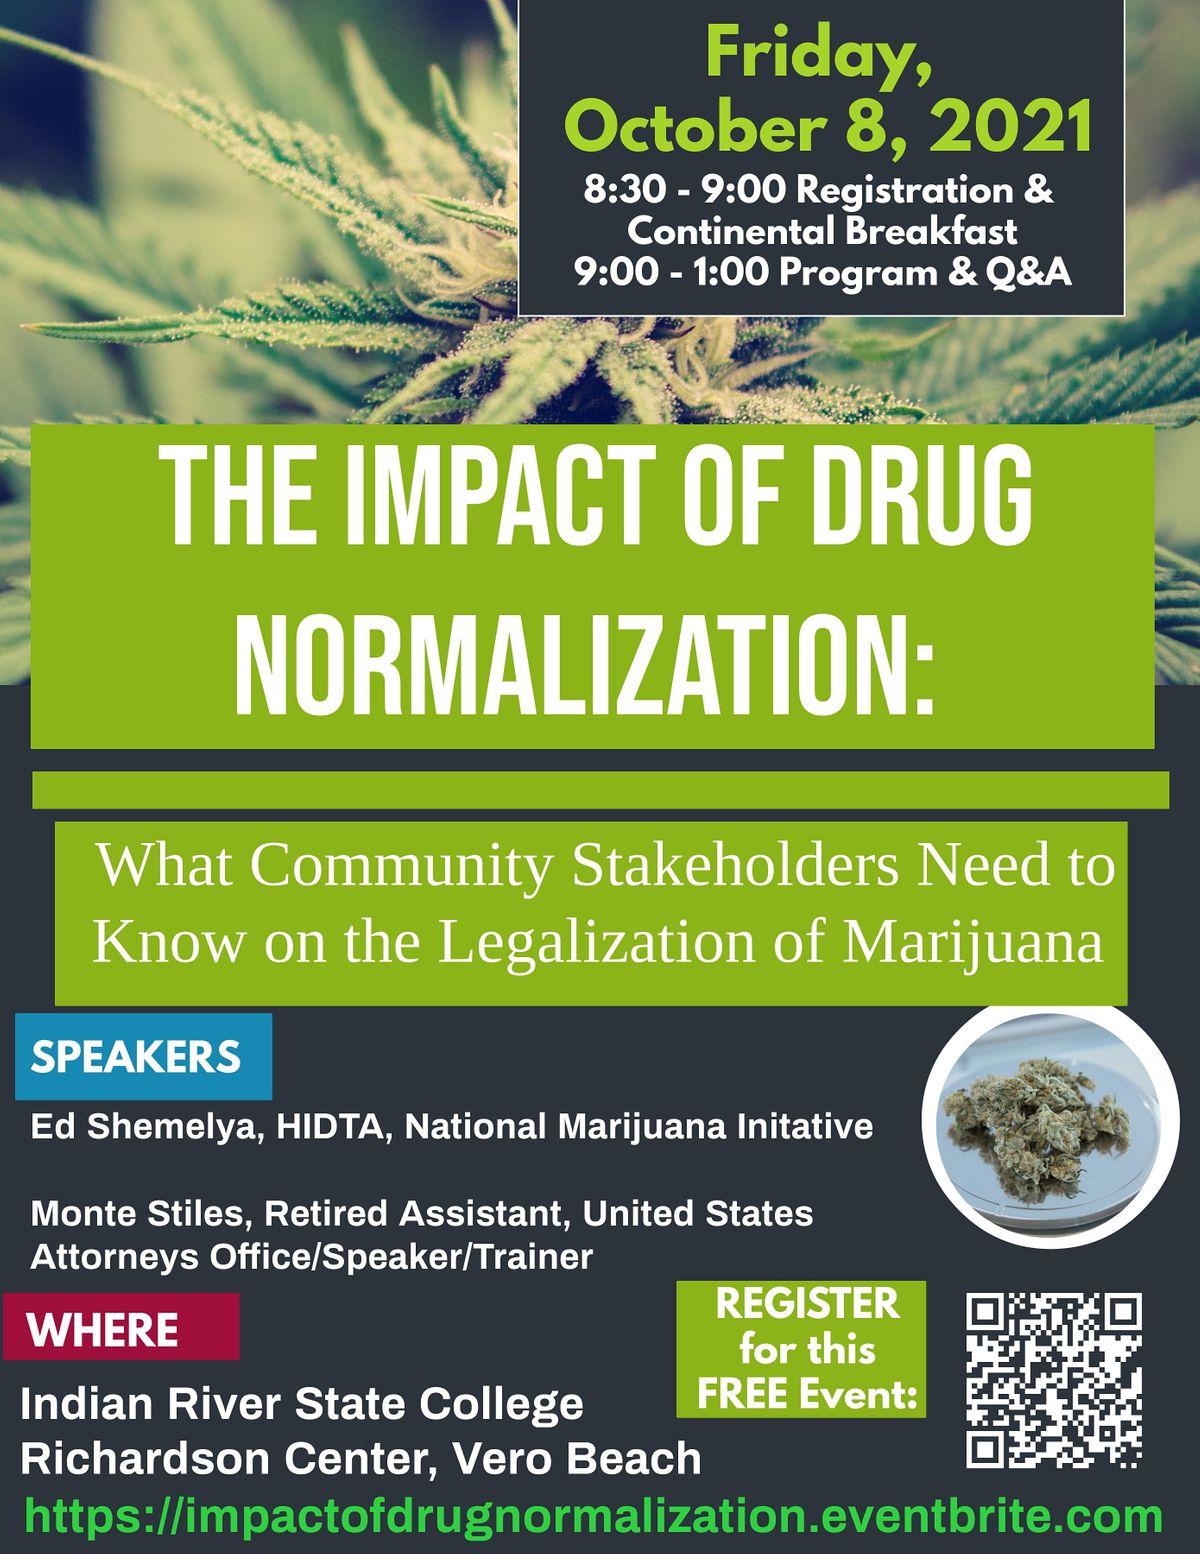 The Impact of Drug Normalization: What Community Stakeholders Need to Know